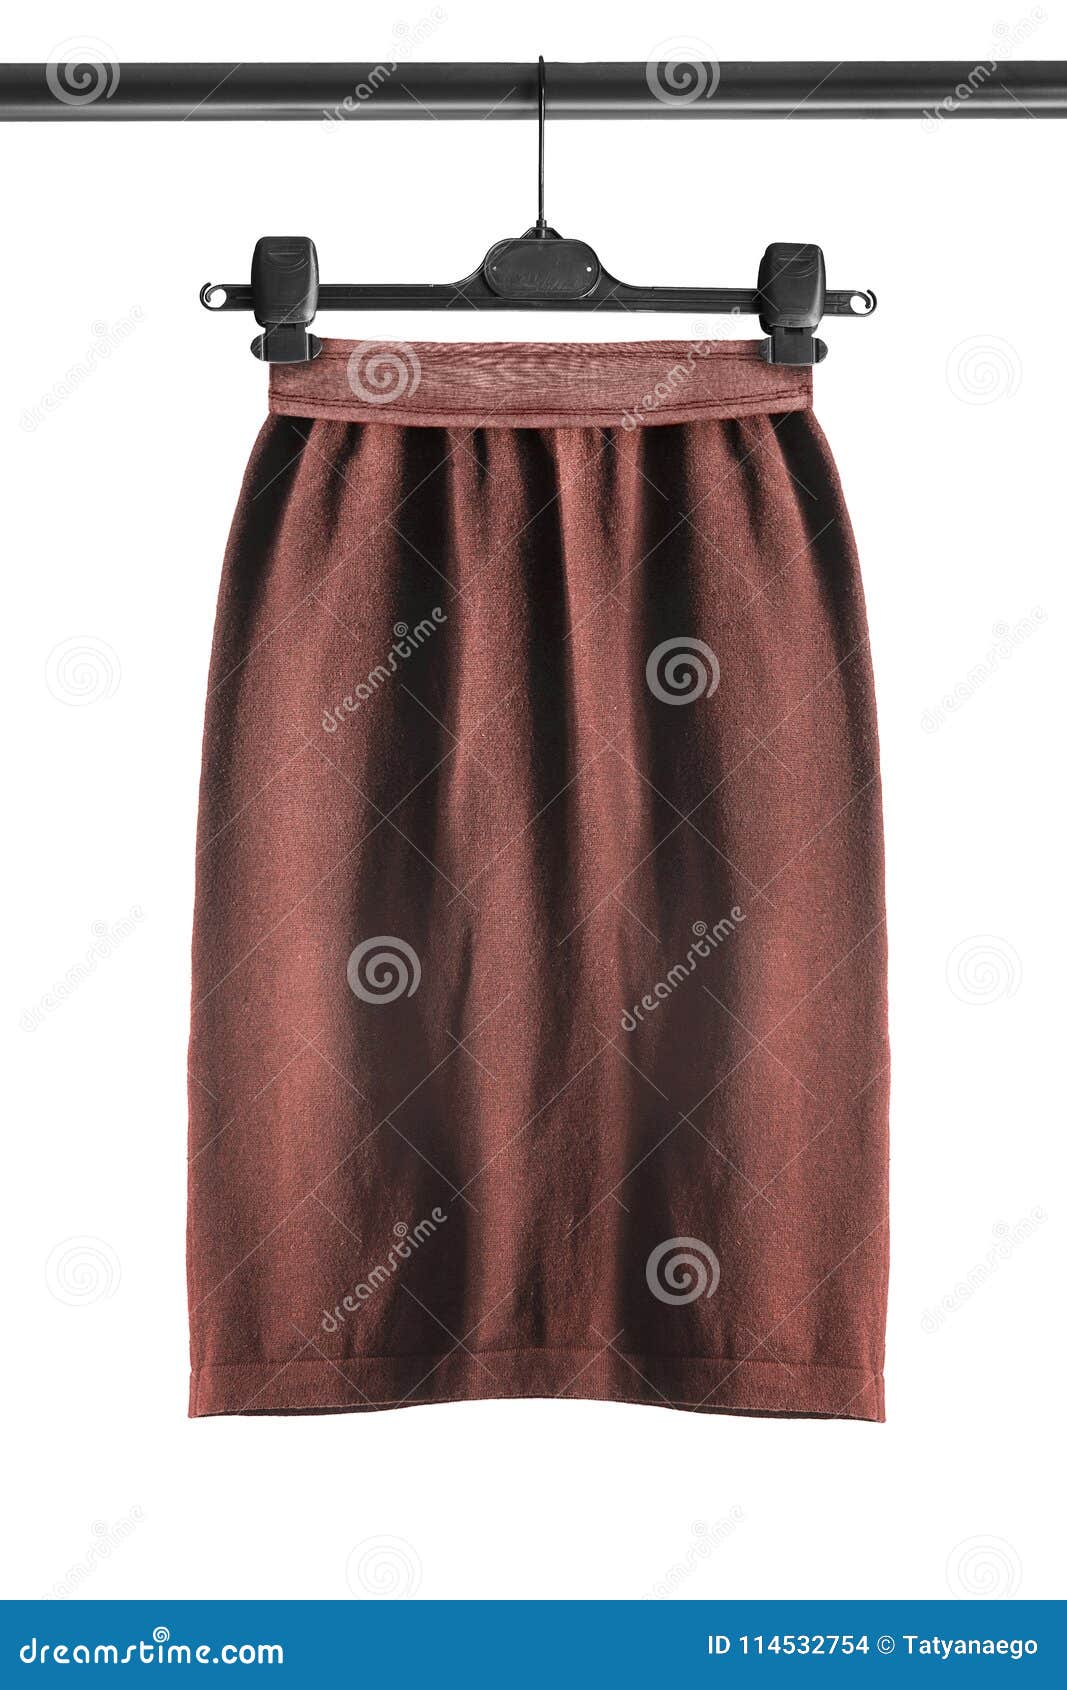 Skirt on clothes rack stock photo. Image of concept - 114532754